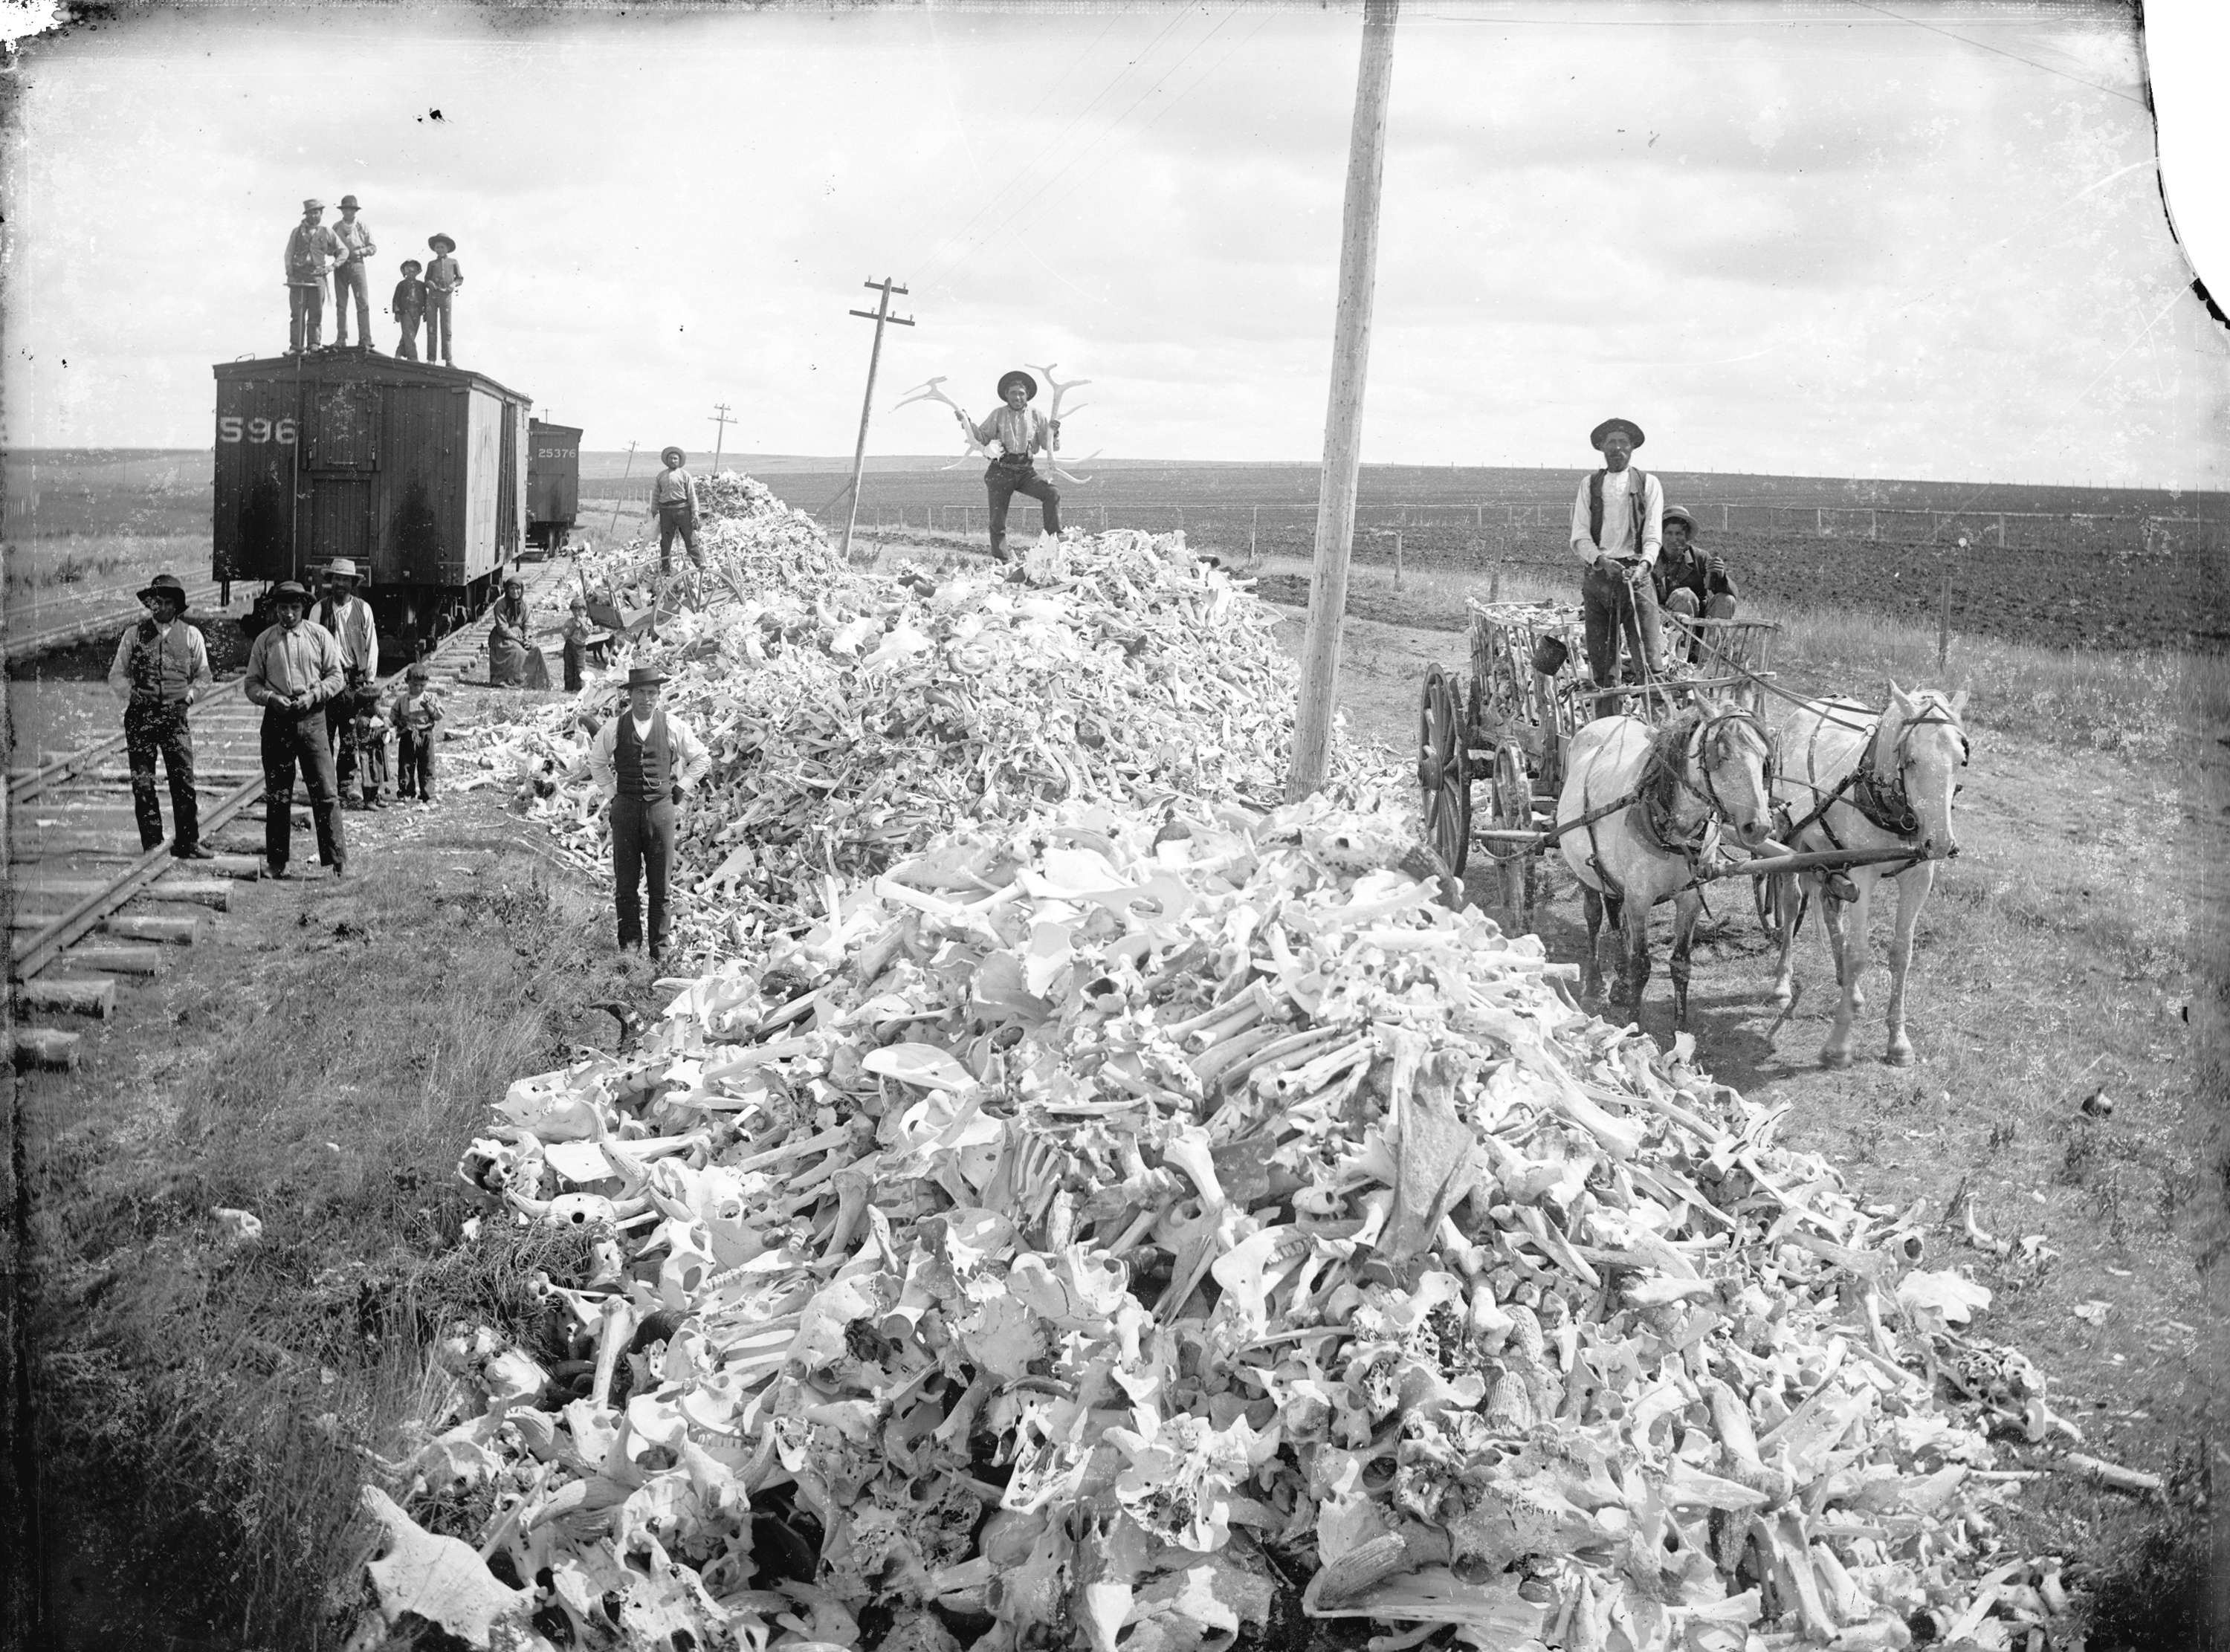 Buffalo bones gathered from the Prairie for shipment, at Gull Lake, N.W.T.  - City of Vancouver Archives